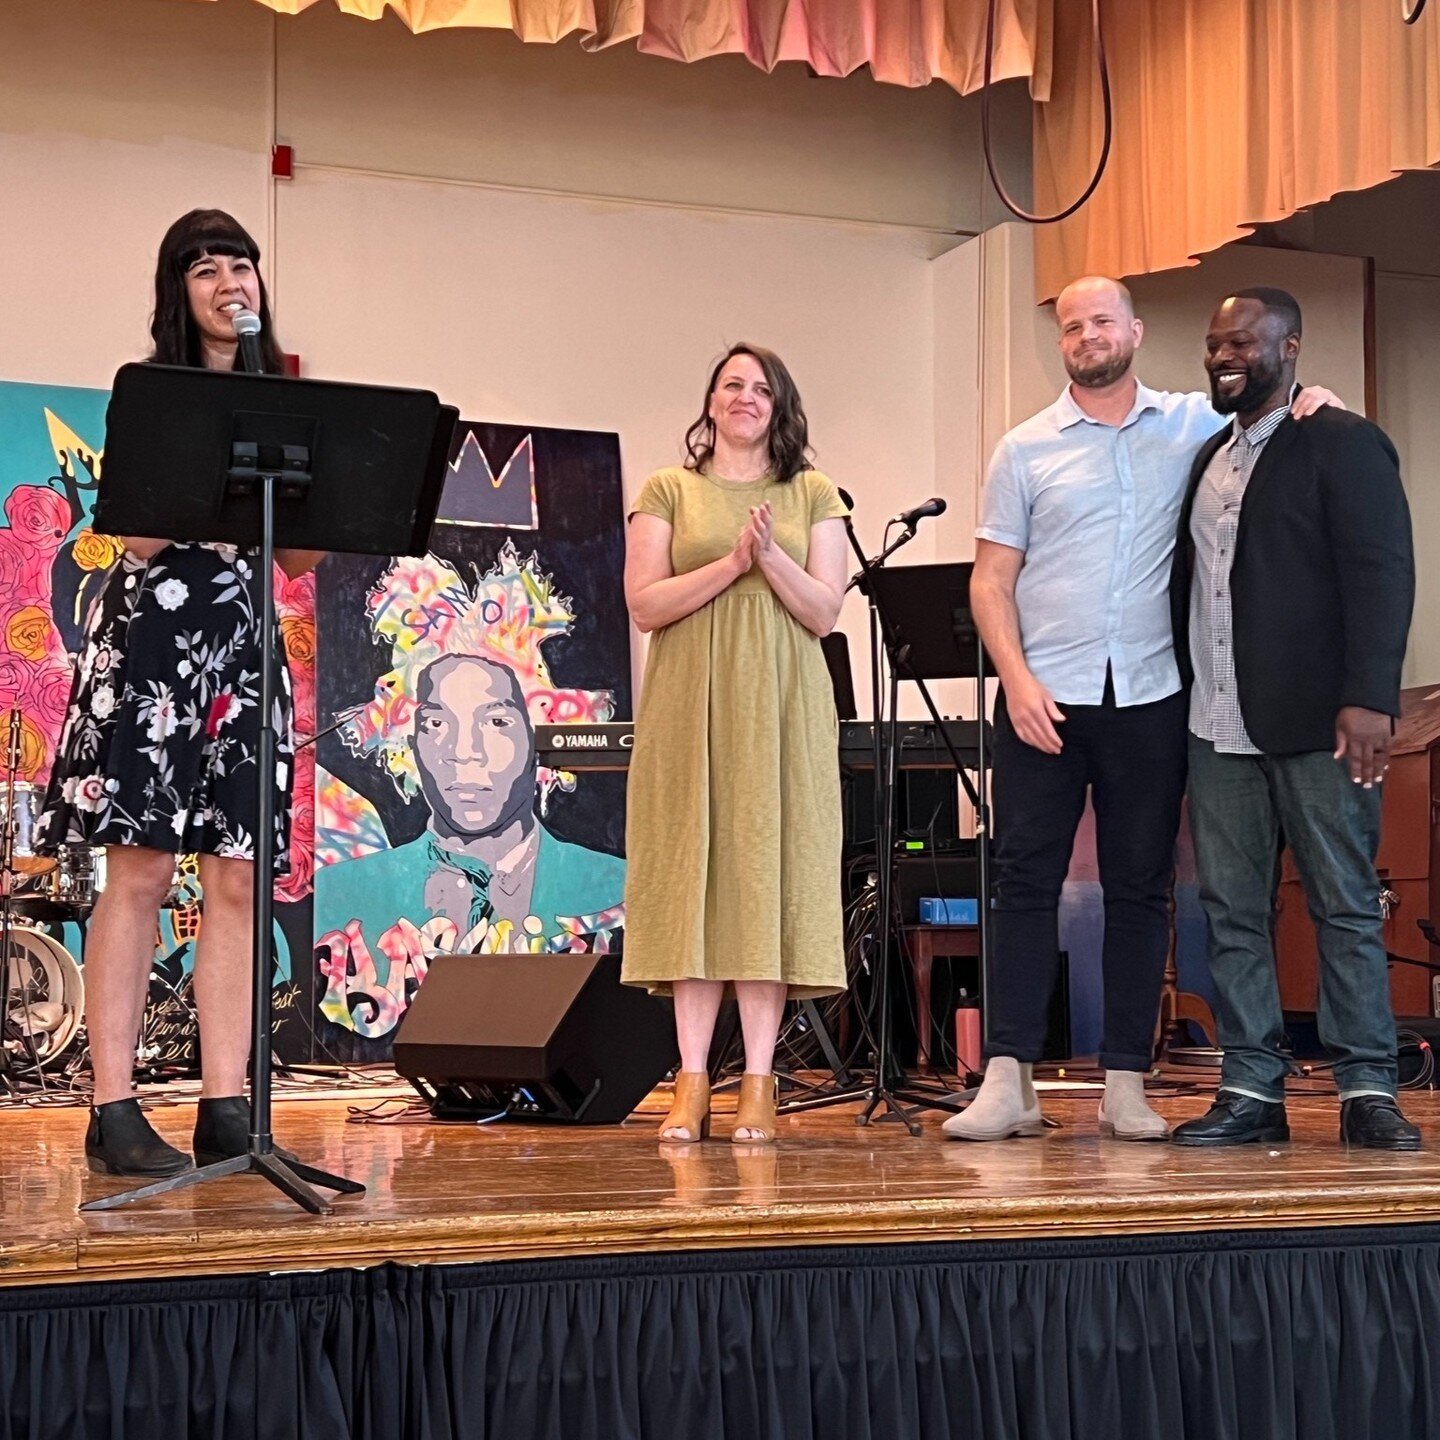 Last Sunday was a momentous one in the life of our church ⛪✨ May 7th marked the first official day that Reality Church Boston and @thetableboston gathered as one united church! We shared stories from our two communities, installed and prayed for our 